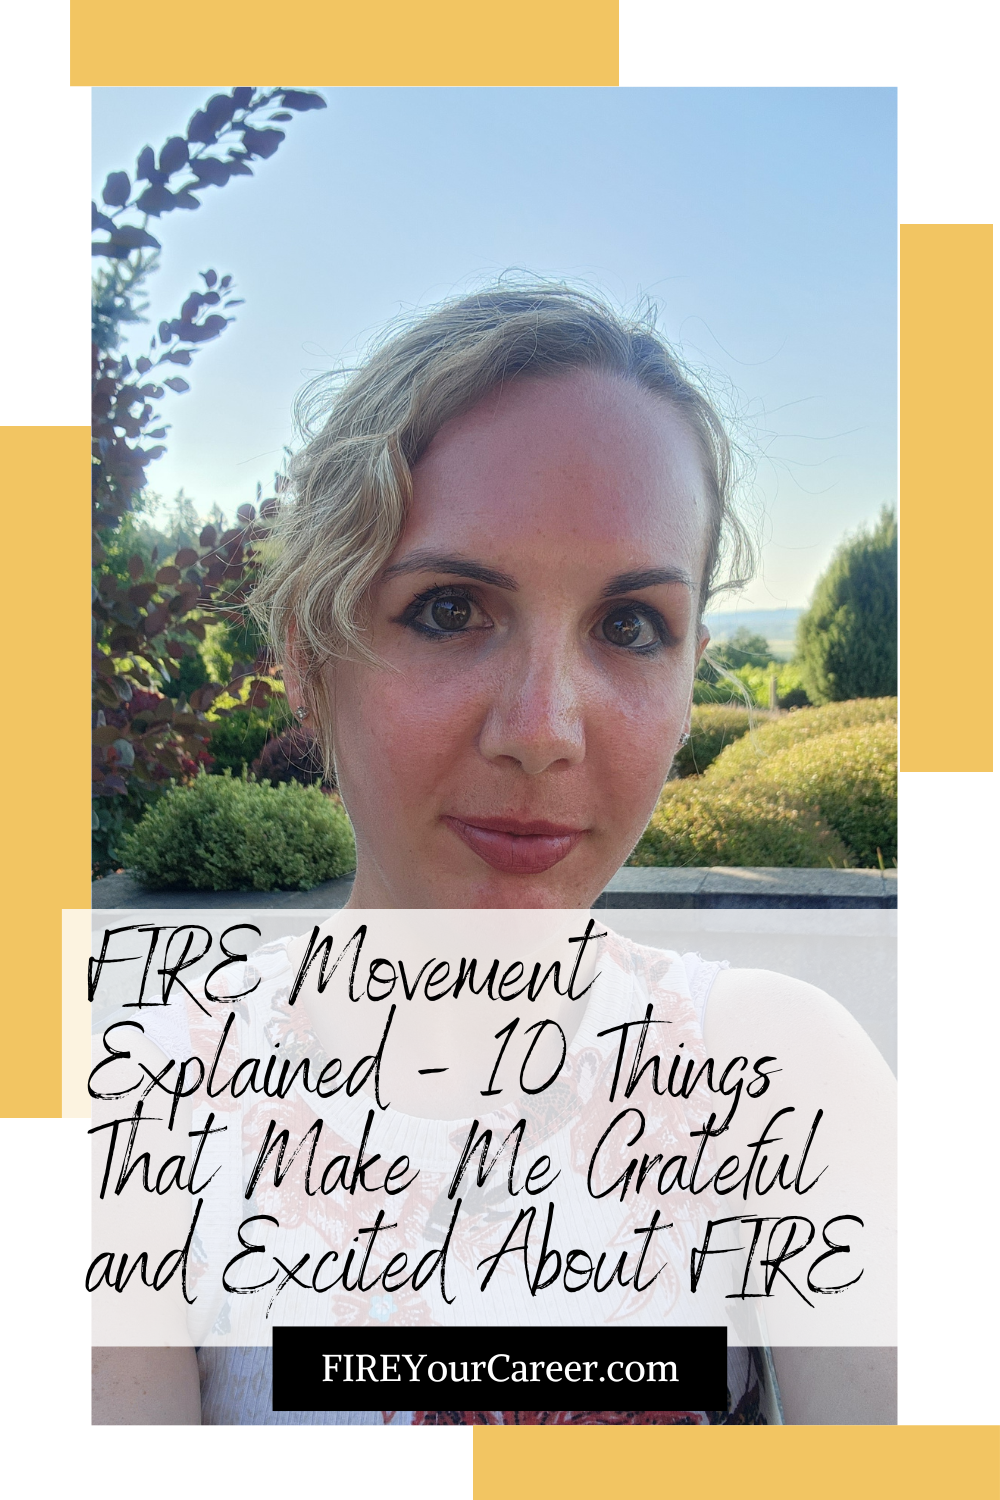 FIRE Movement Explained - 10 Things That Make Me Grateful and Excited About FIRE